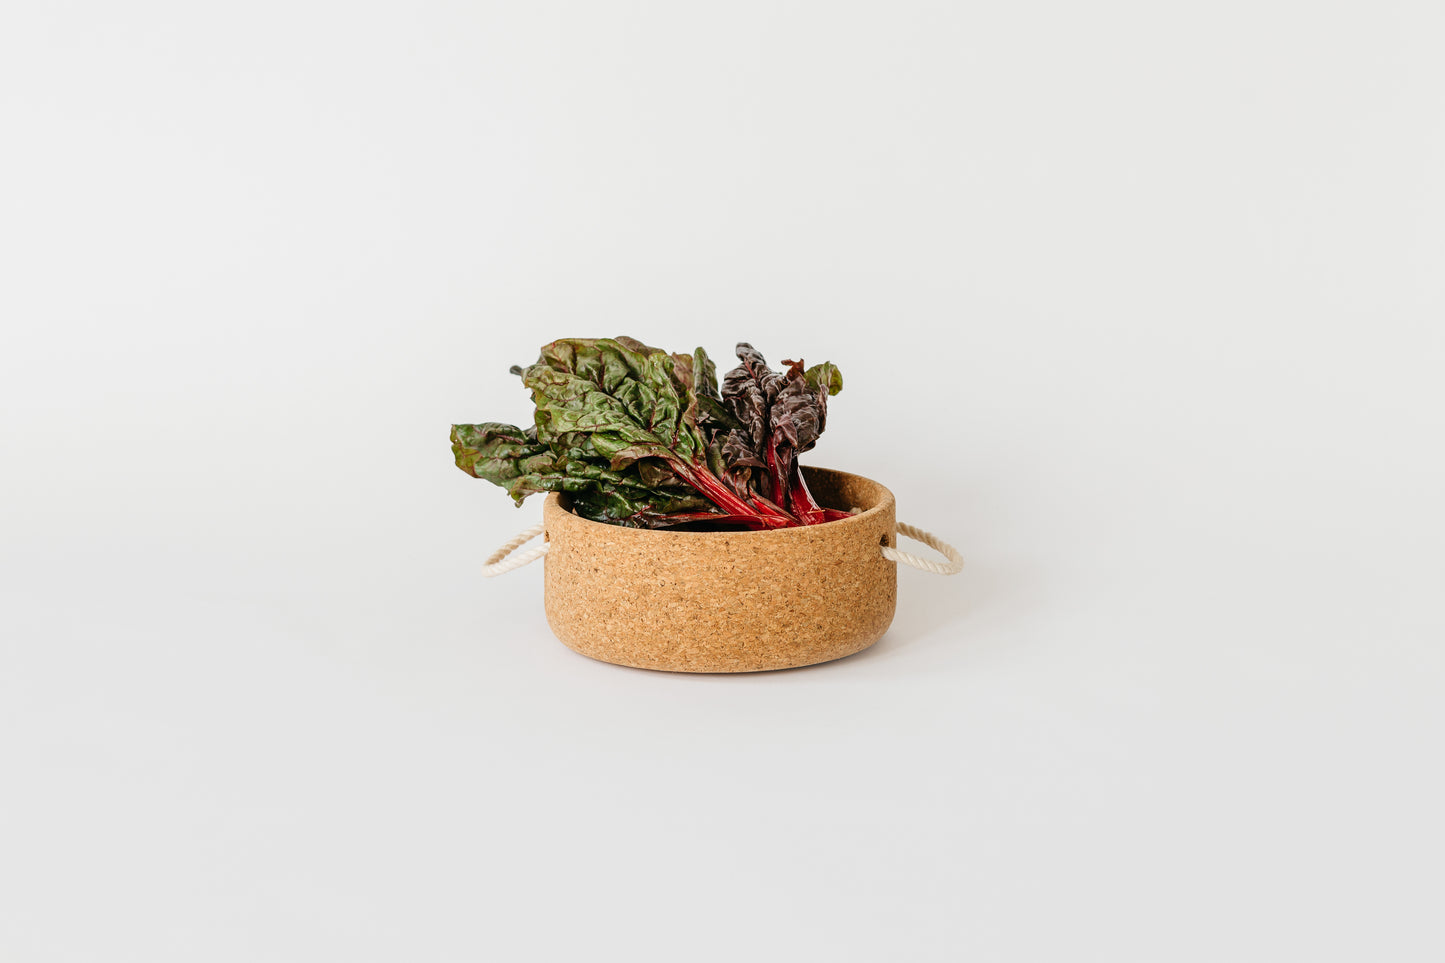 Large cork bowl filled with greens.